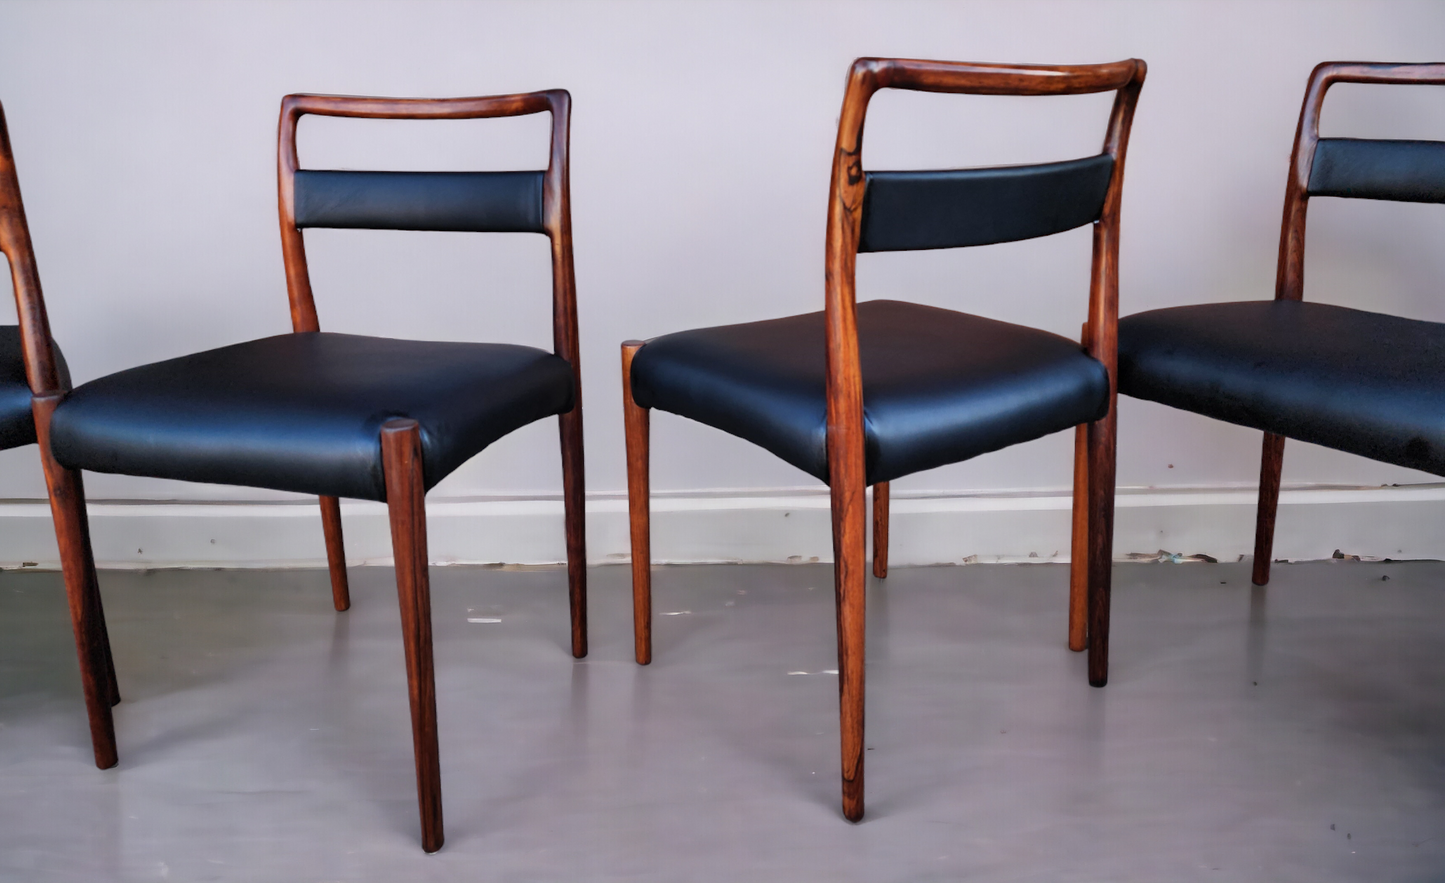 4 REFINISHED REUPHOLSTERED Danish Mid Century Modern Rosewood Chairs by Kai Kristiansen